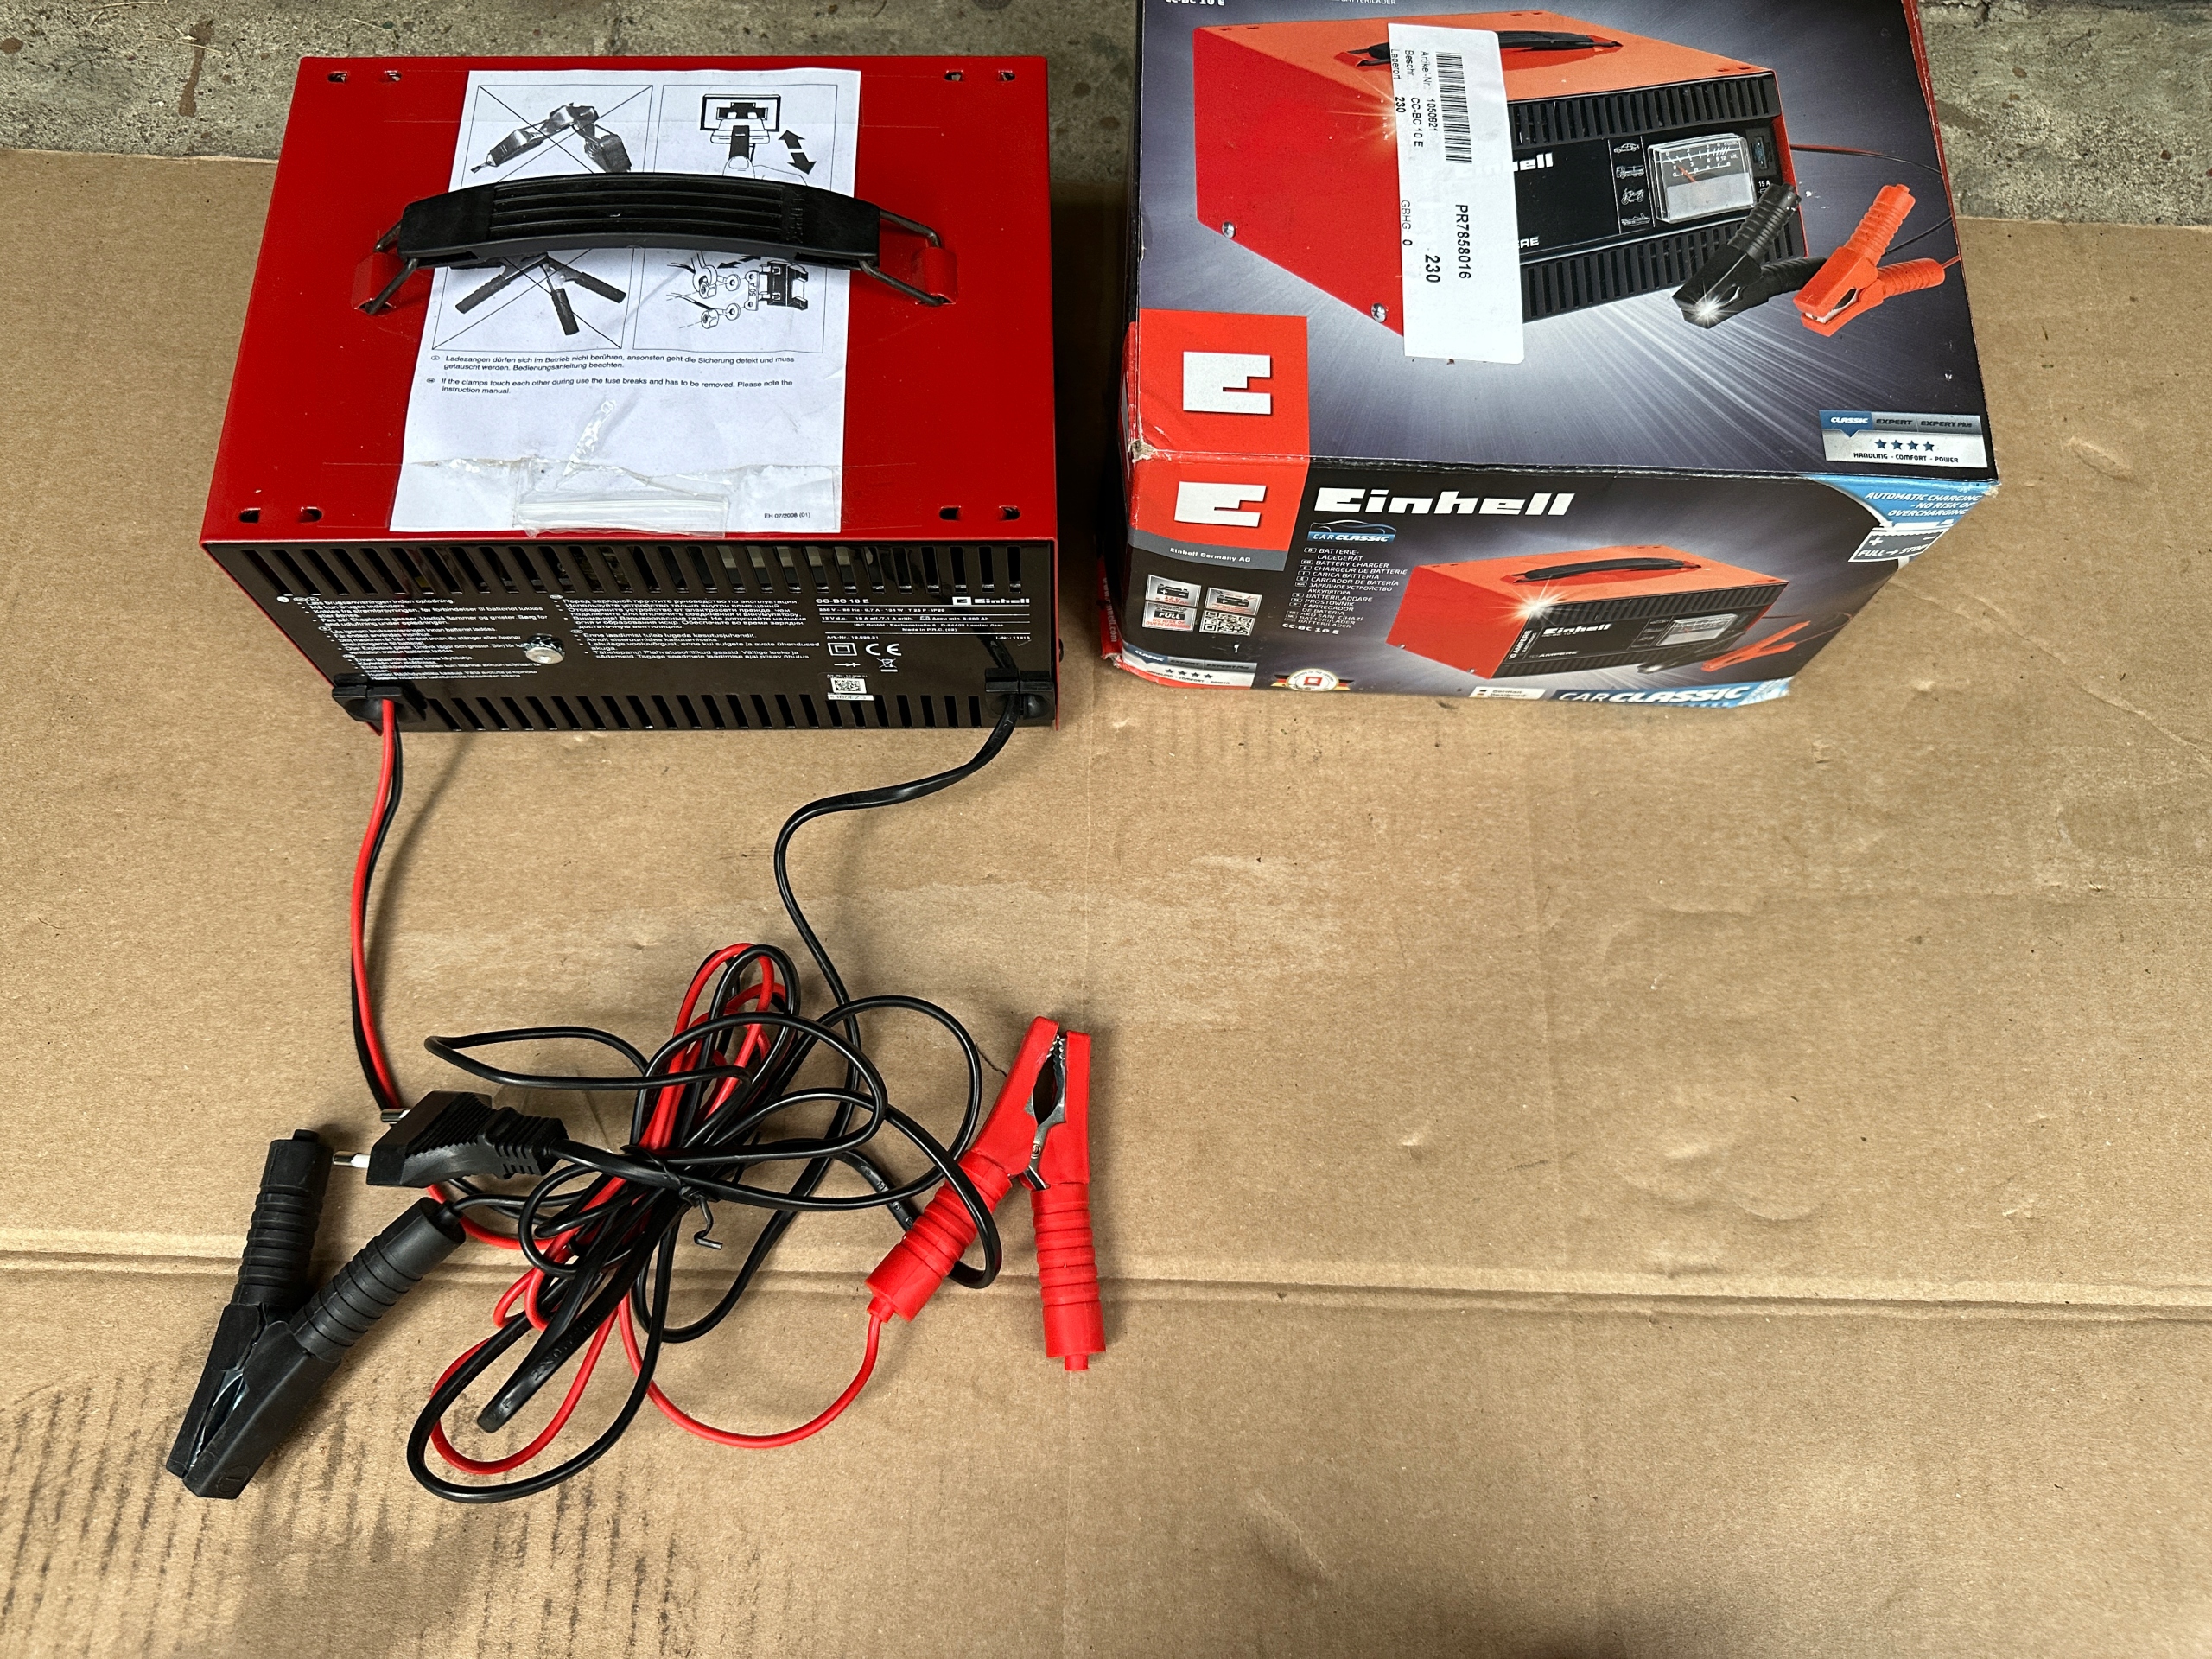 Chargeur Einhell 1050821 12 V